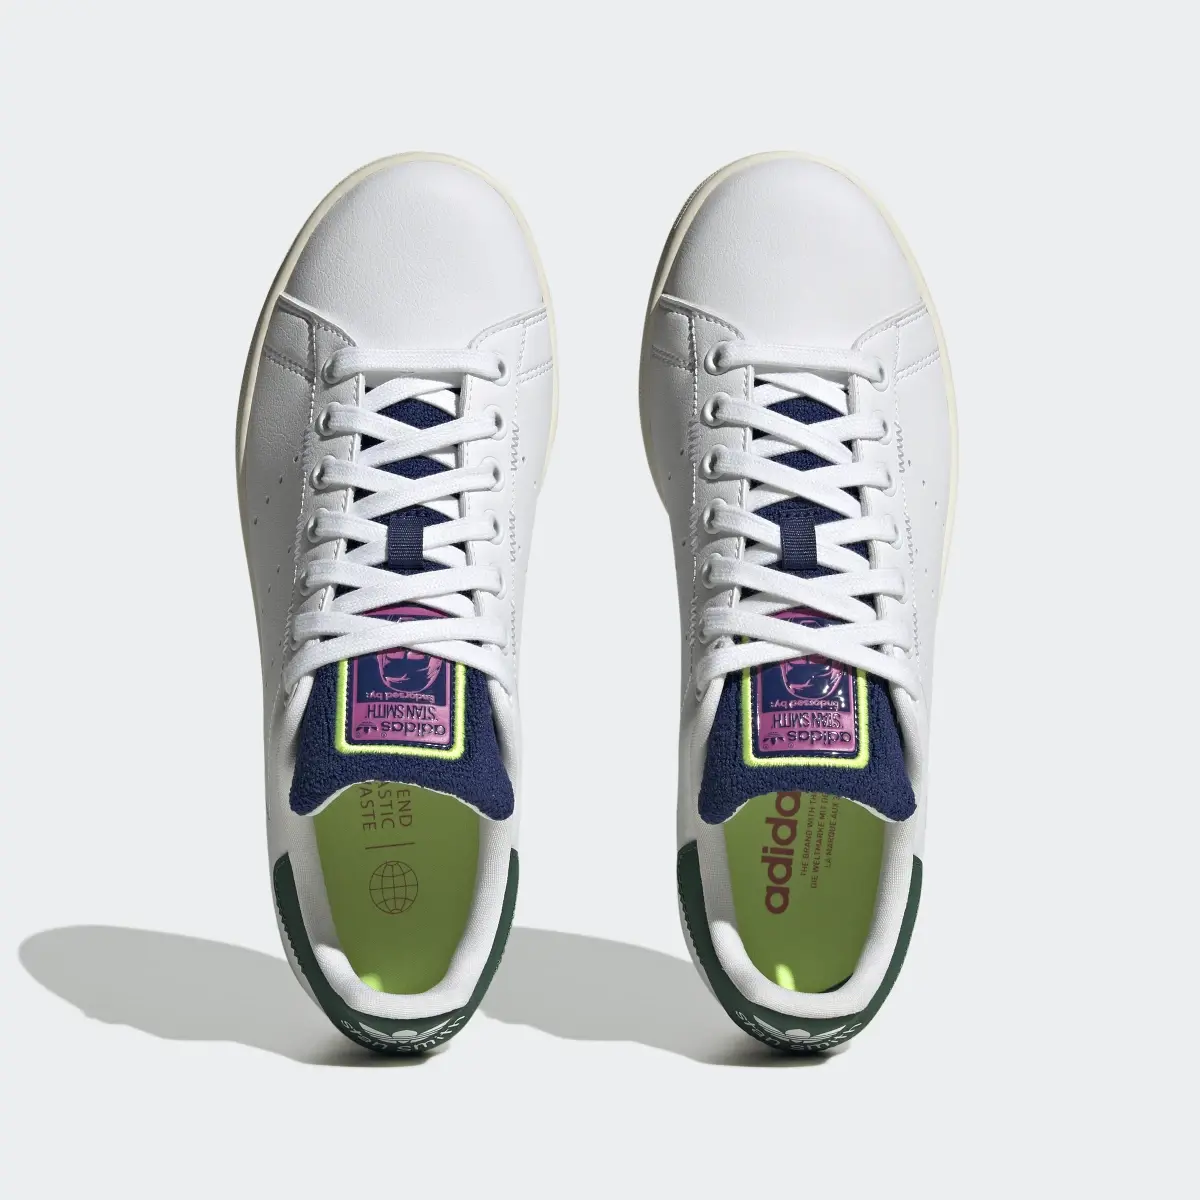 Adidas Stan Smith Shoes. 3